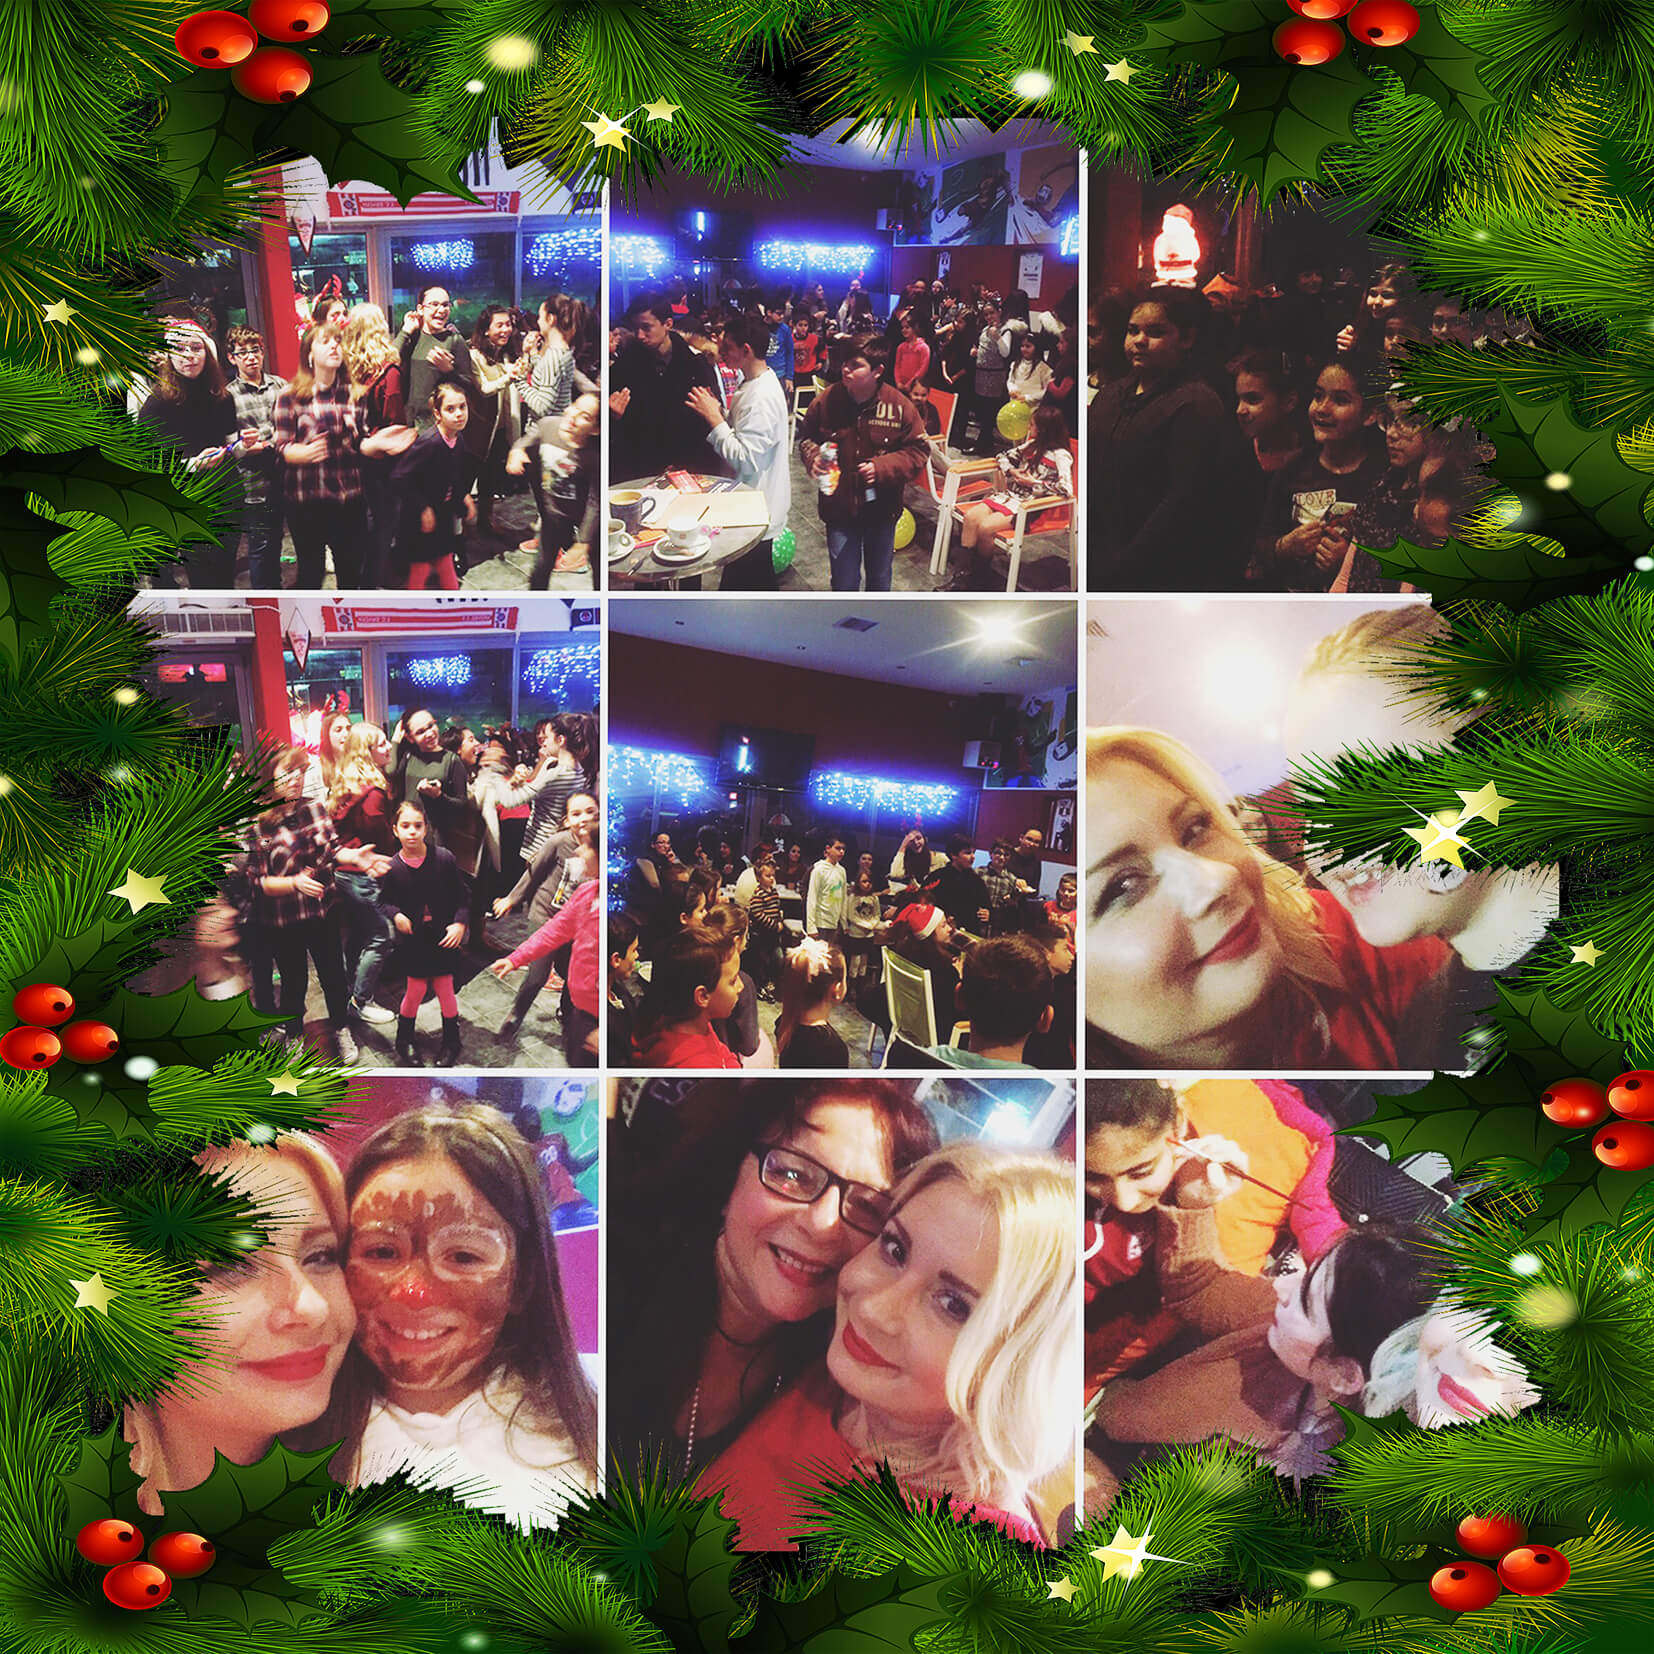 xmass party 2016